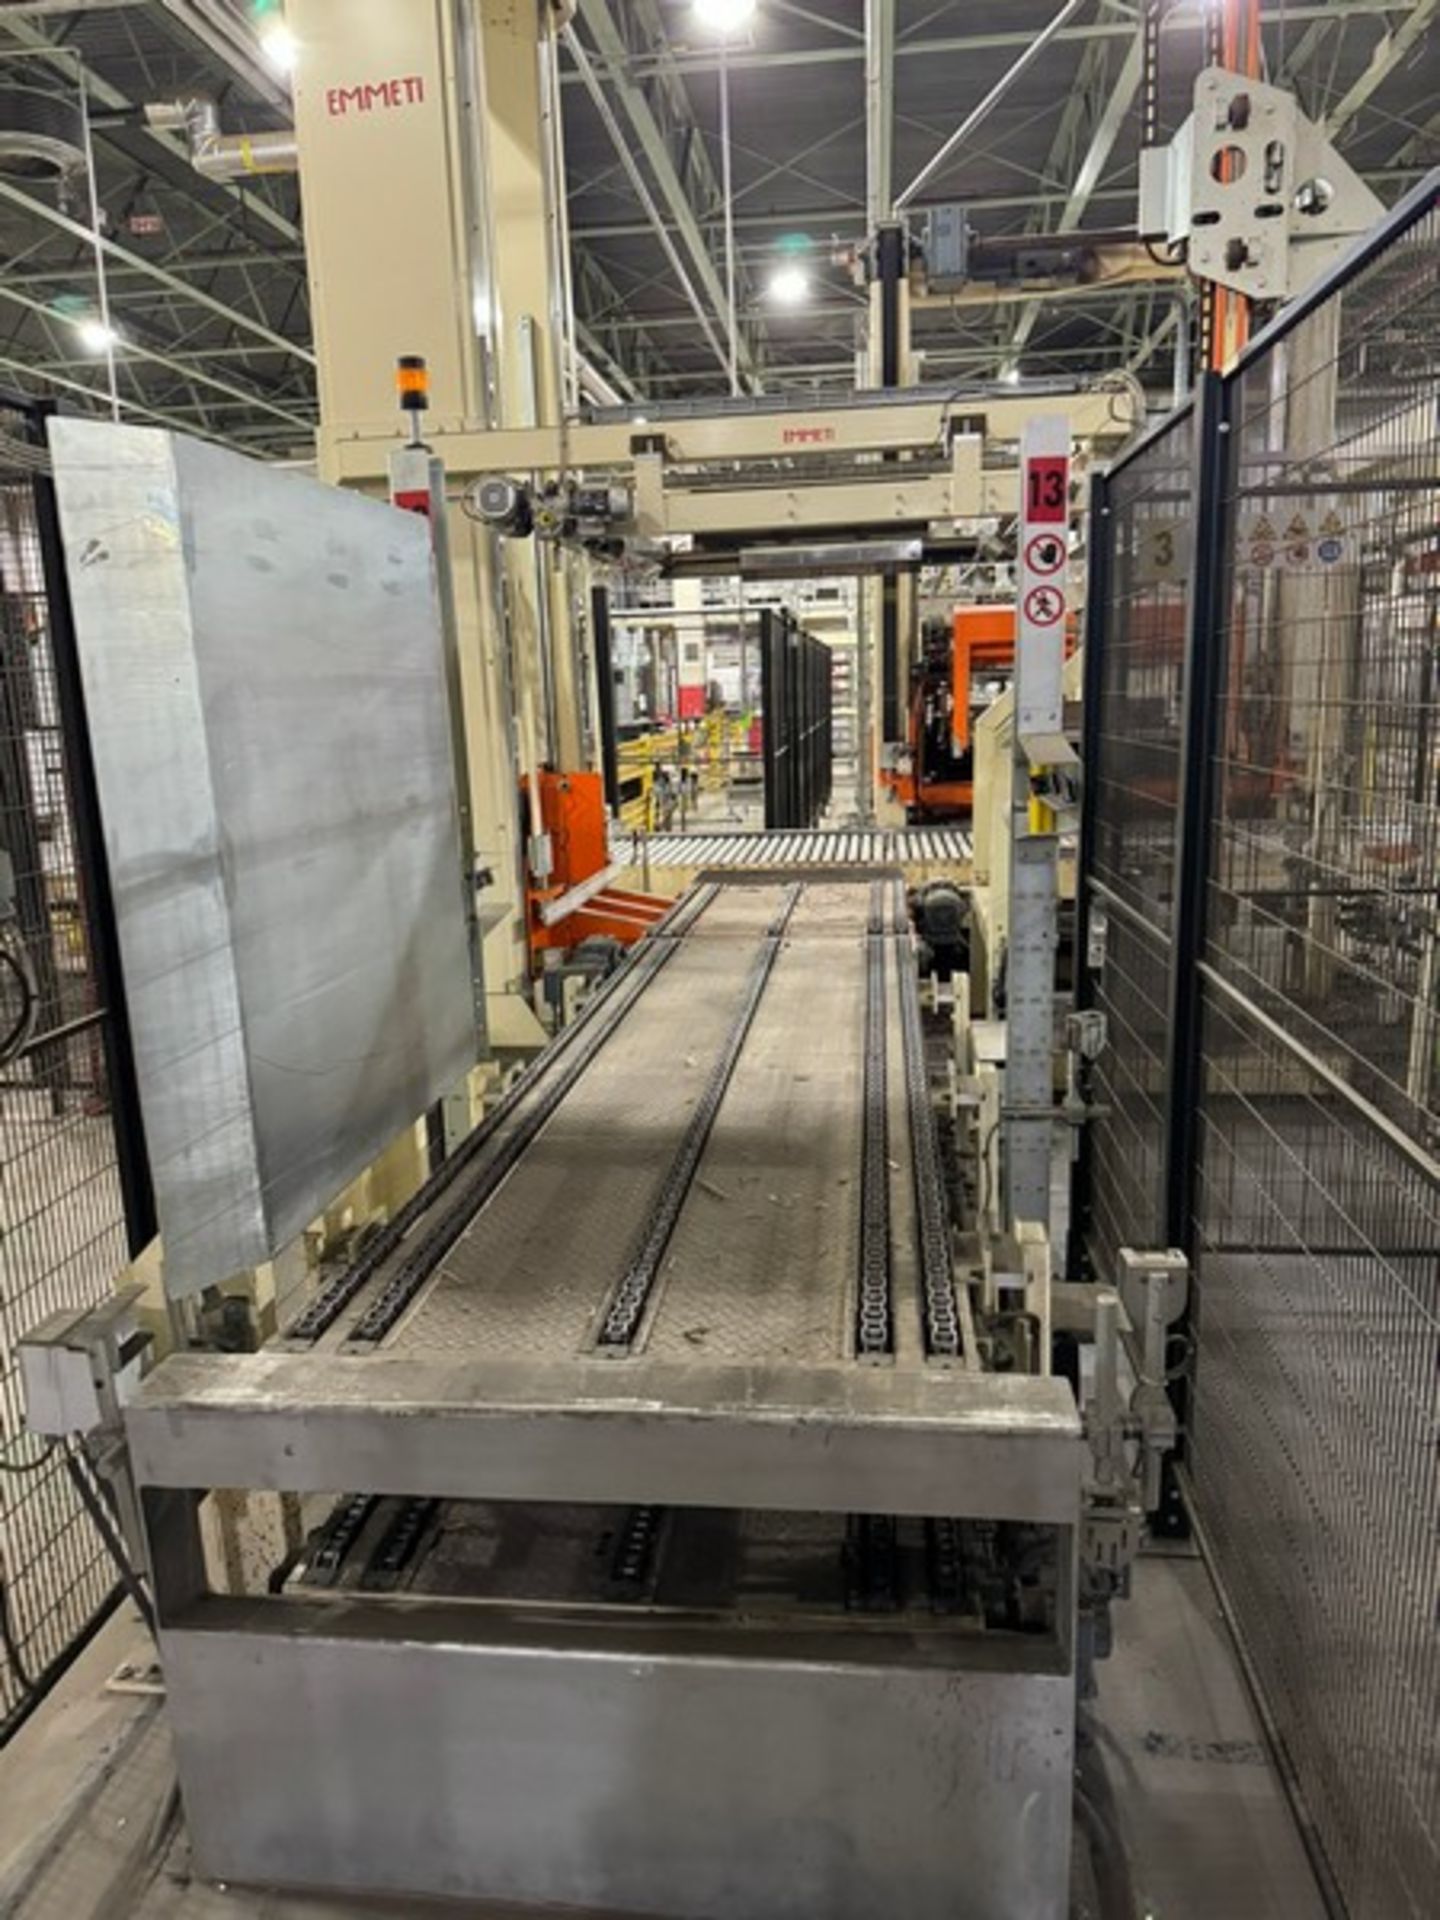 Emmeti Palletizer Tower, with Pallet Conveyor & Sorting Arms (LOCATED IN FREEHOLD, N.J.) - Image 2 of 3